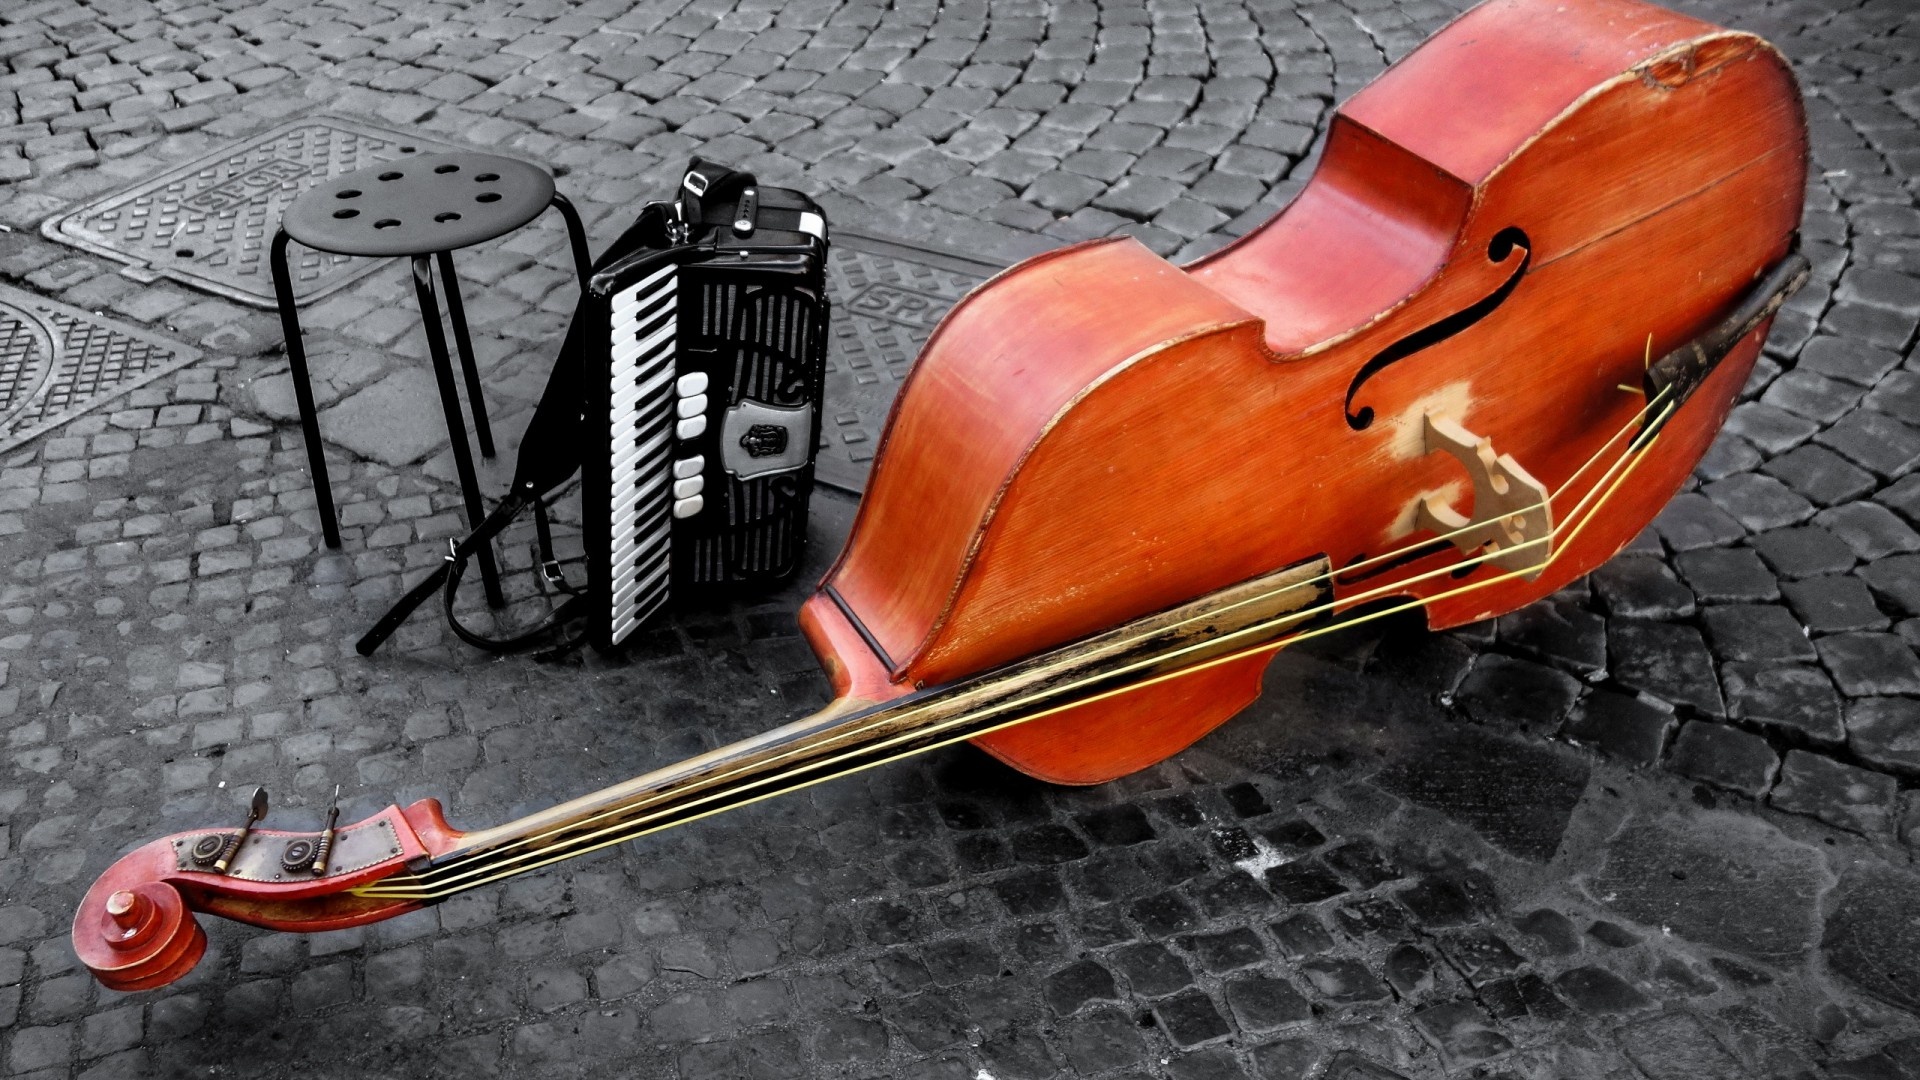 Accordion: Street cello players, Live performance, Piano acc. and cello duet. 1920x1080 Full HD Wallpaper.